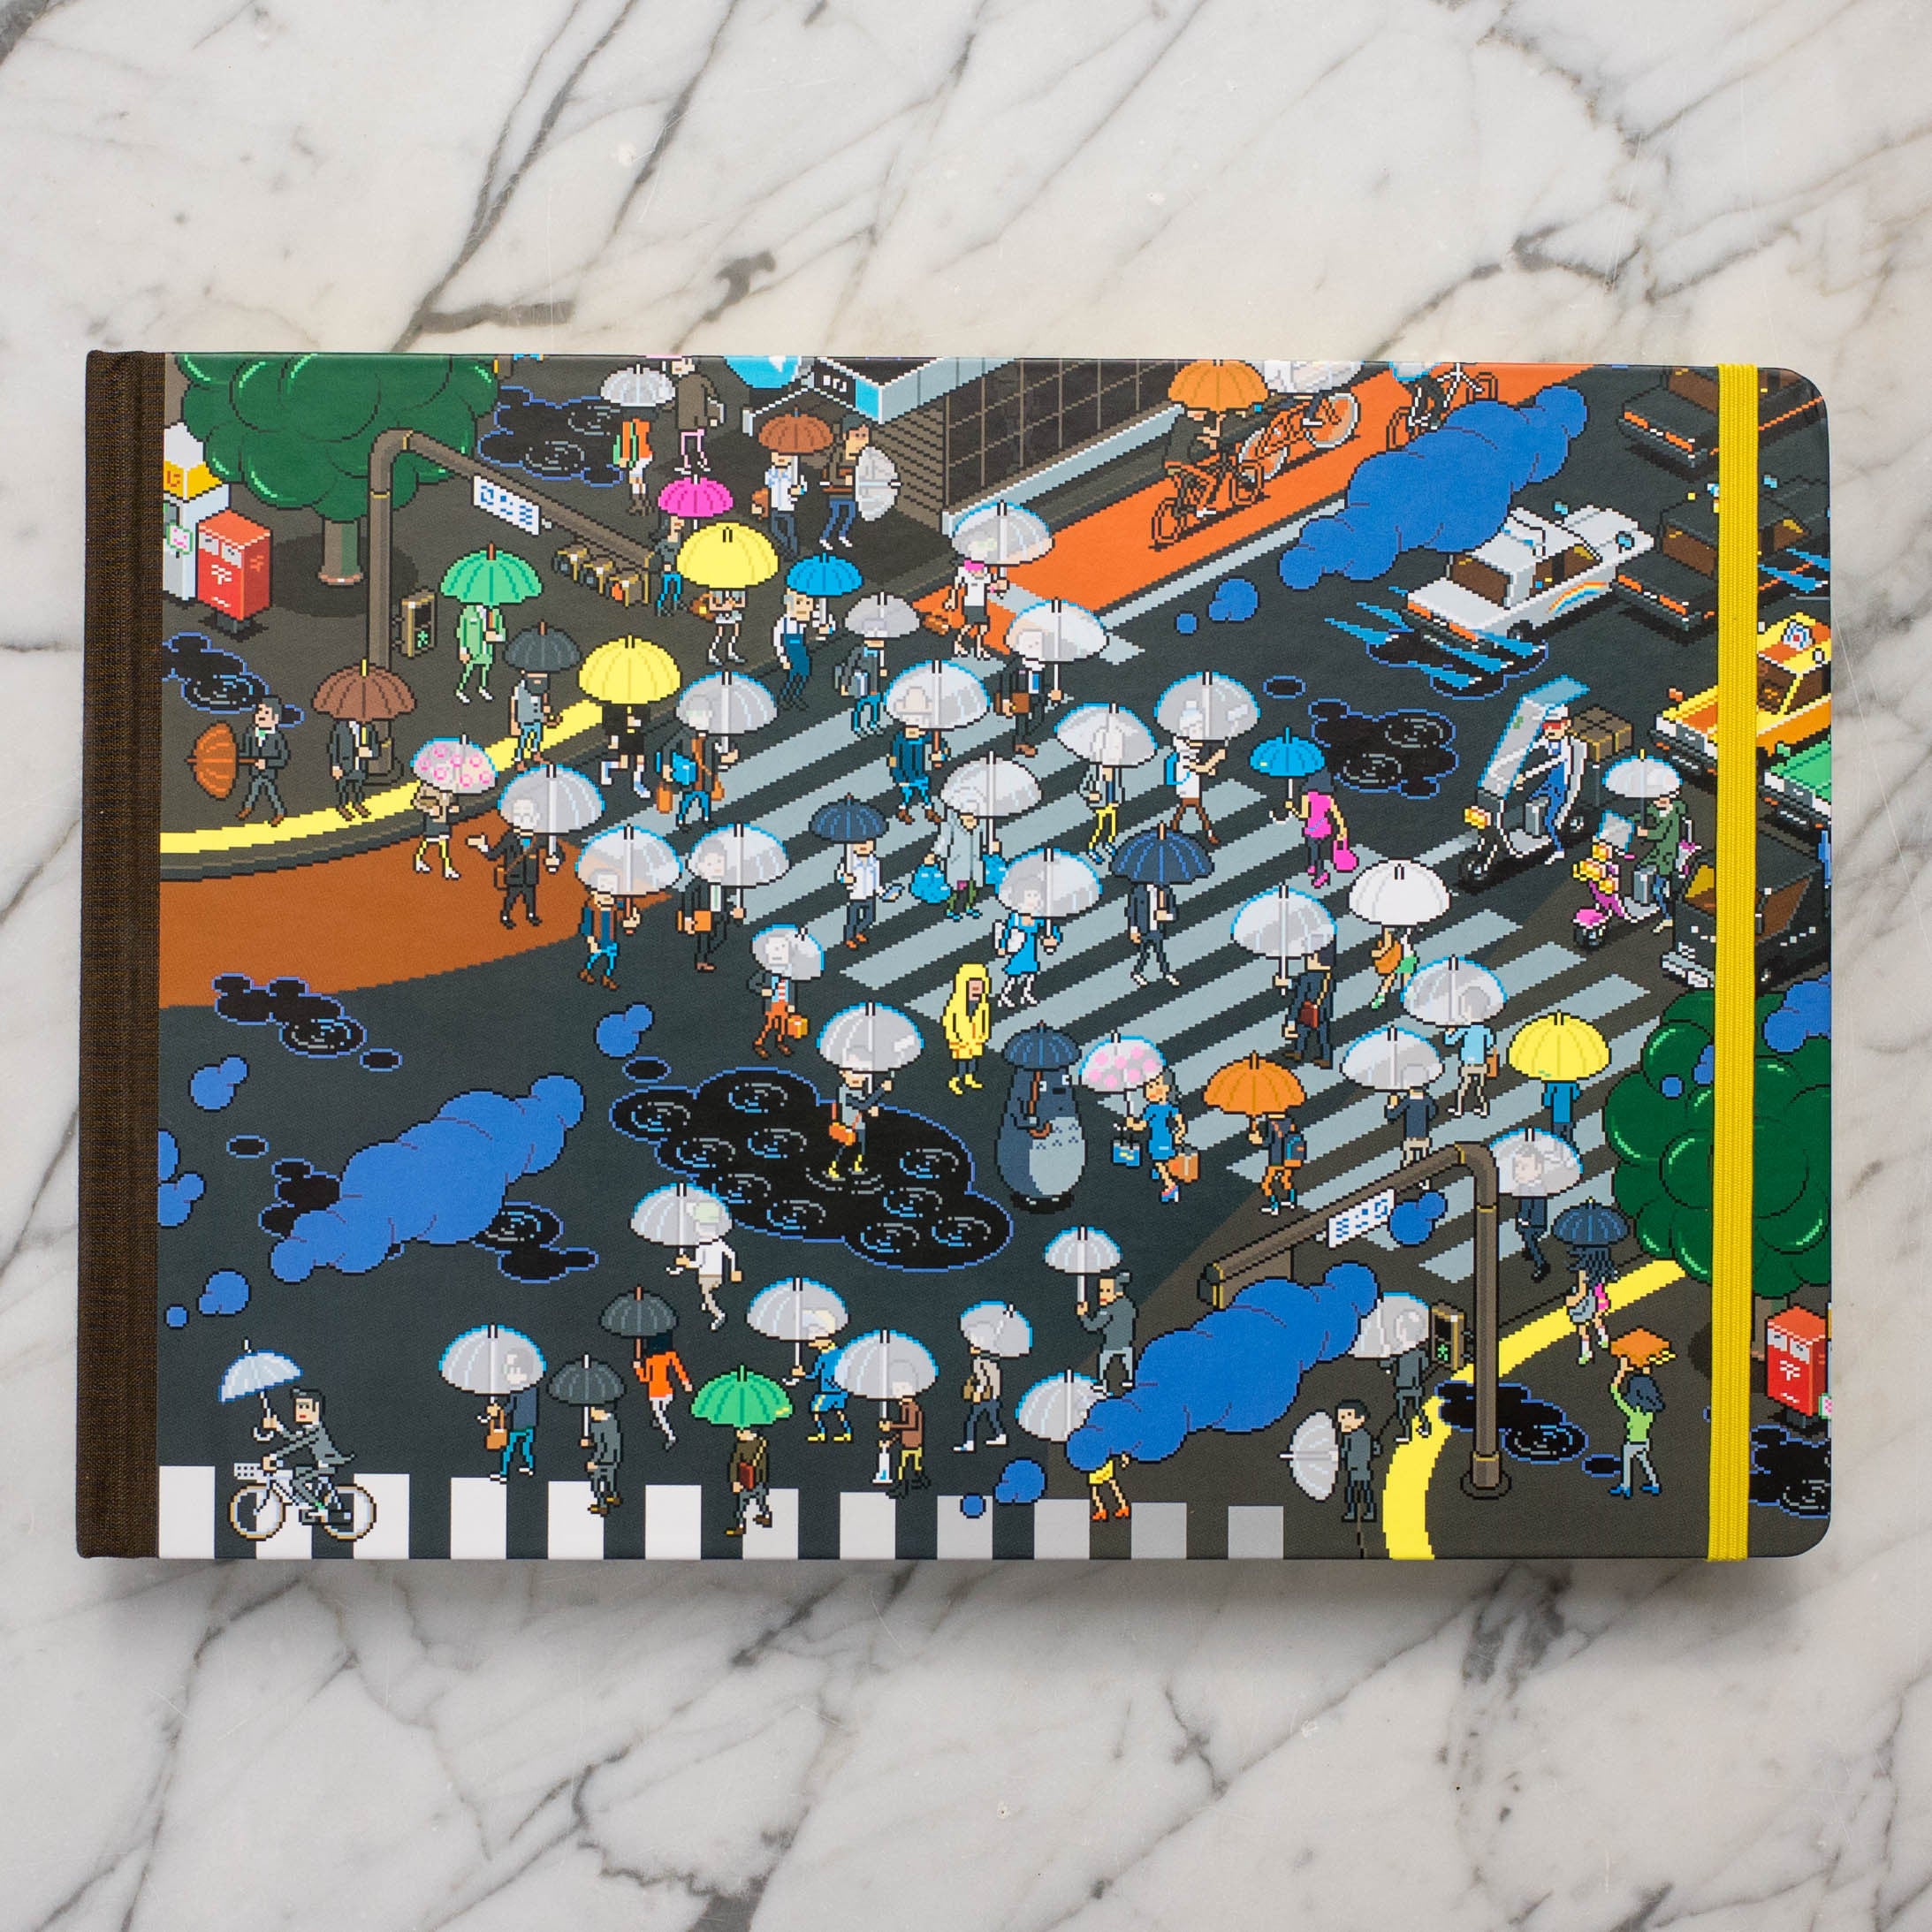 Louis Vuitton teams up with graphic legend 'eBoys' for an exclusive travel  book on Tokyo - Luxurylaunches